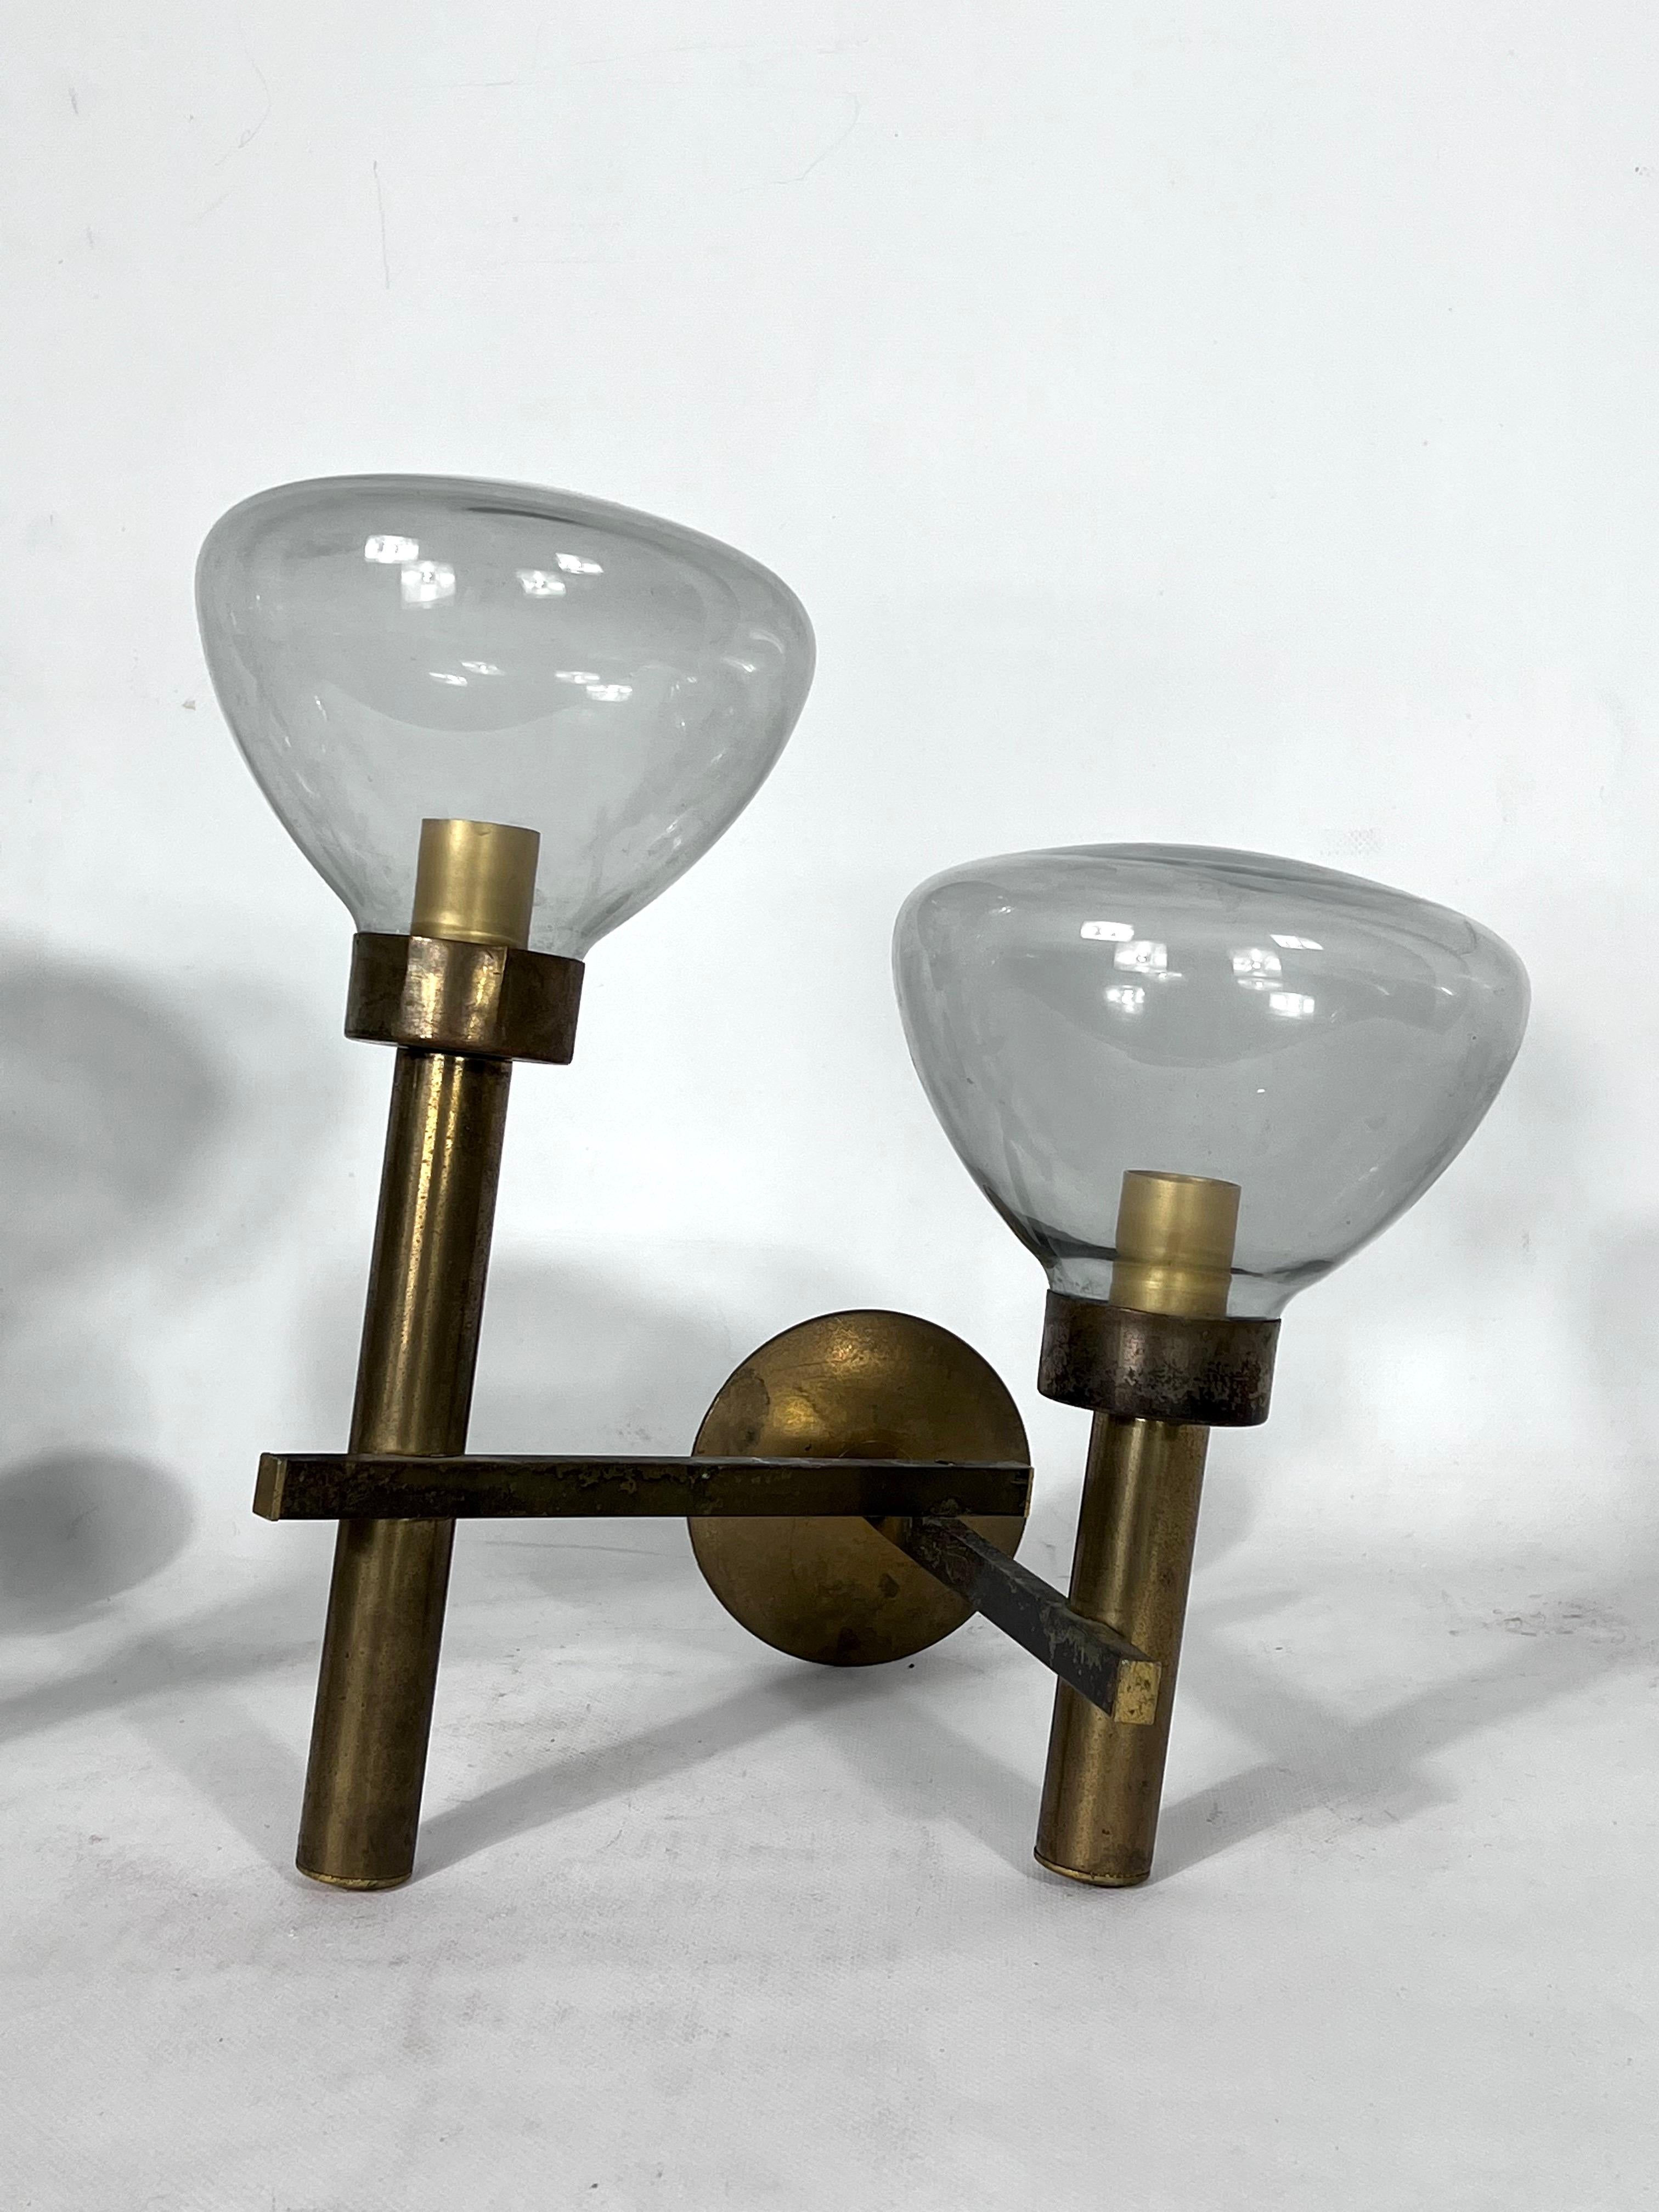 20th Century Large Pair of Brass and Glass Sconces by Sciolari, Italian Modern from 70s